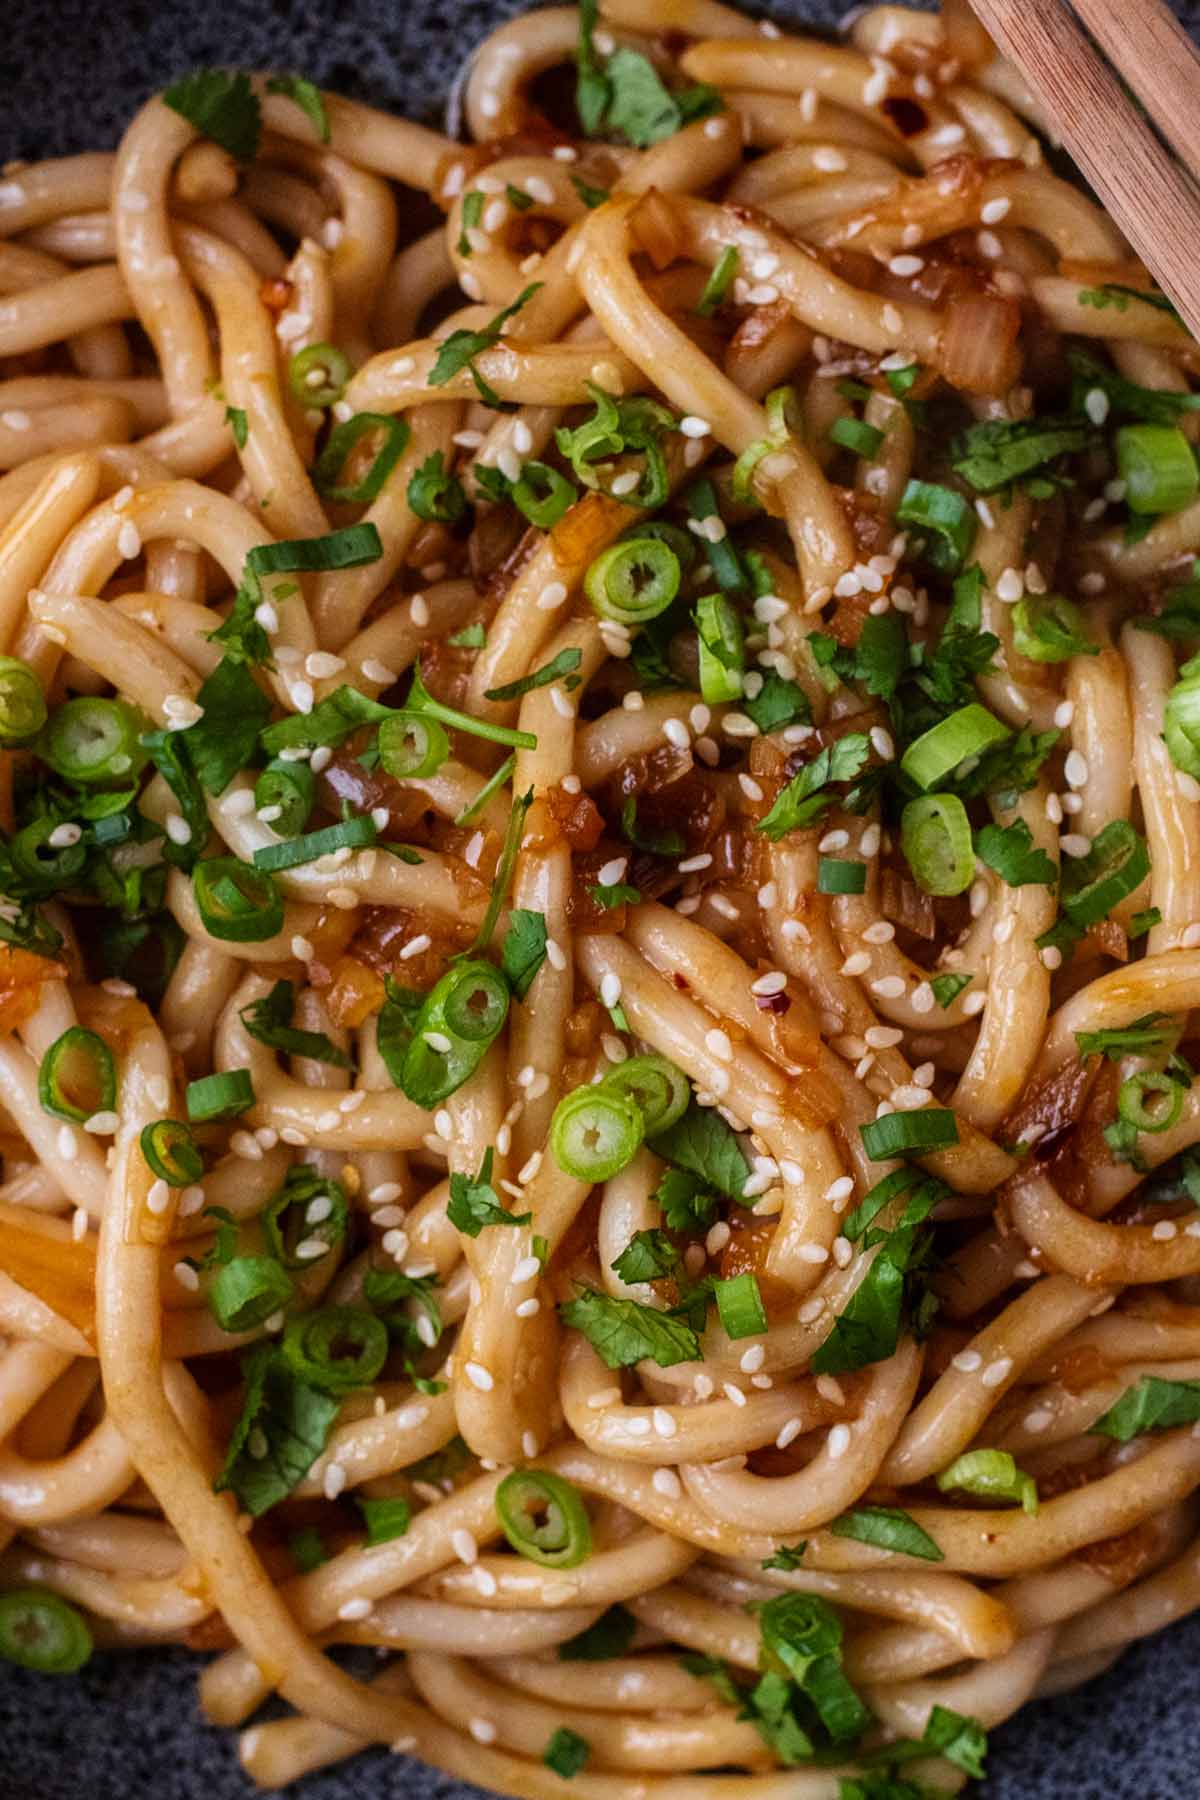 Cooked noodles in a sauce with sesame seeds, sliced spring onions and chopped herbs.